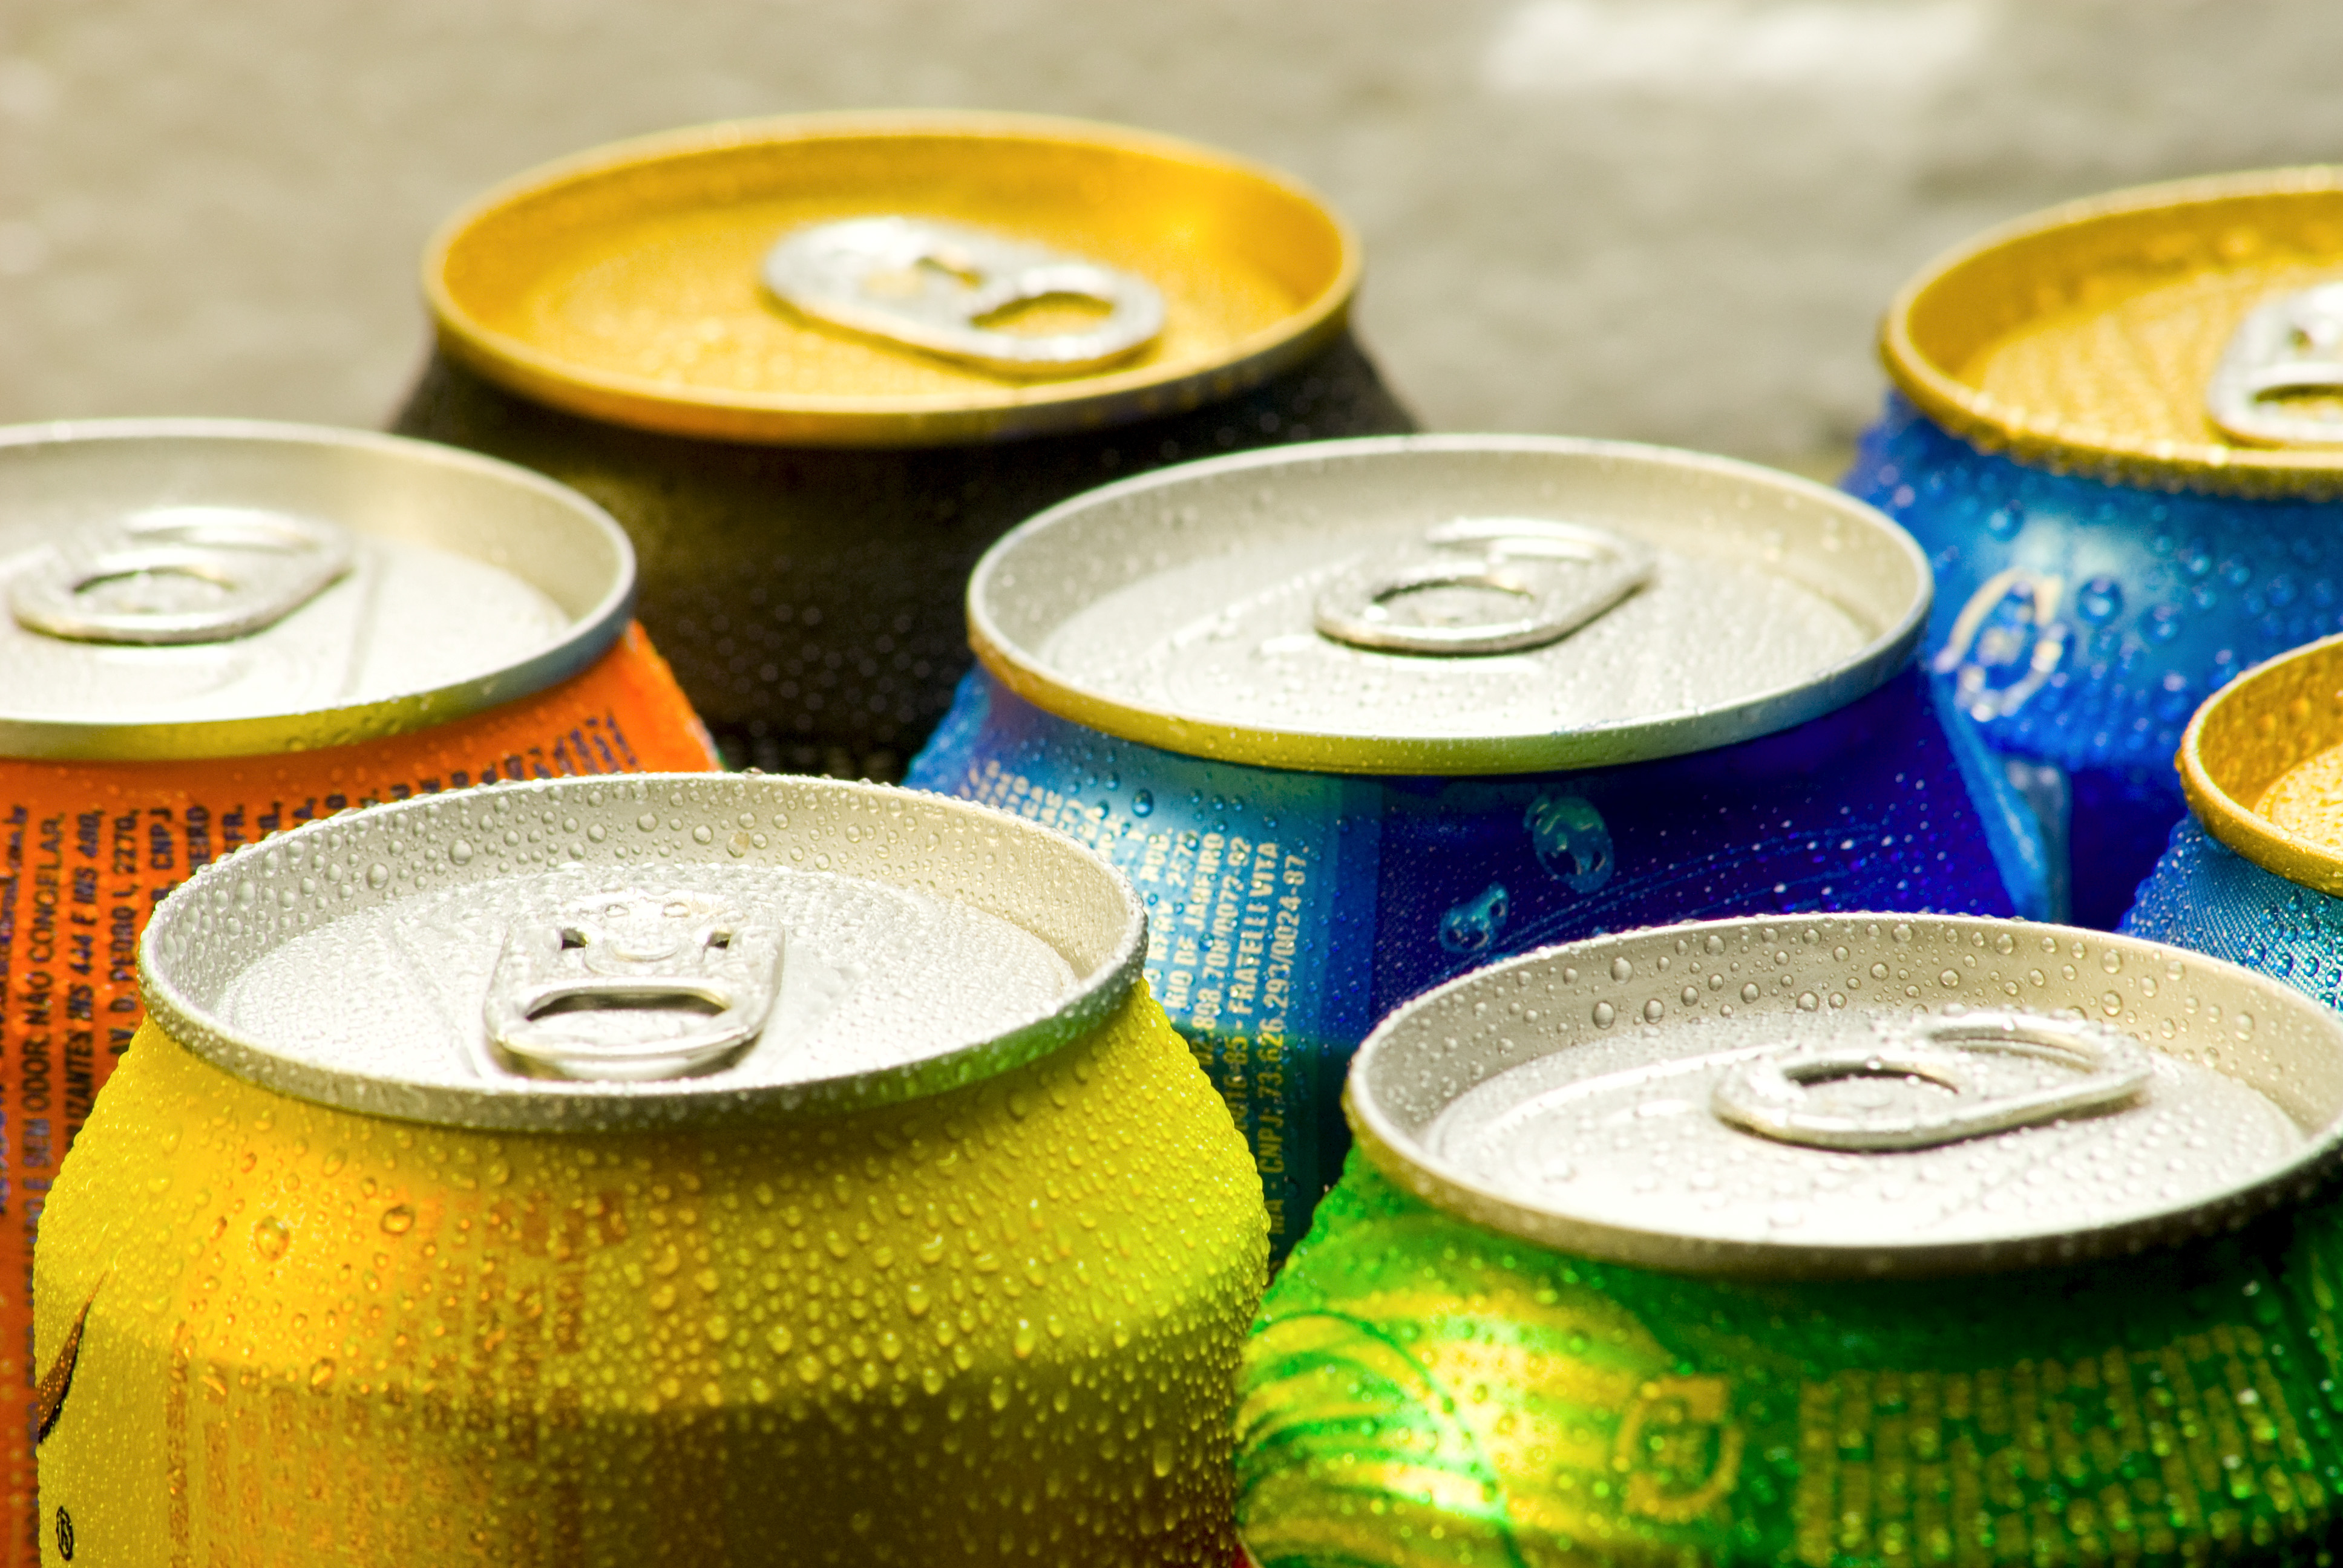 Picture of cans of soft drink. (Celso Pupo Rodrigues—Getty Images/iStockphoto)